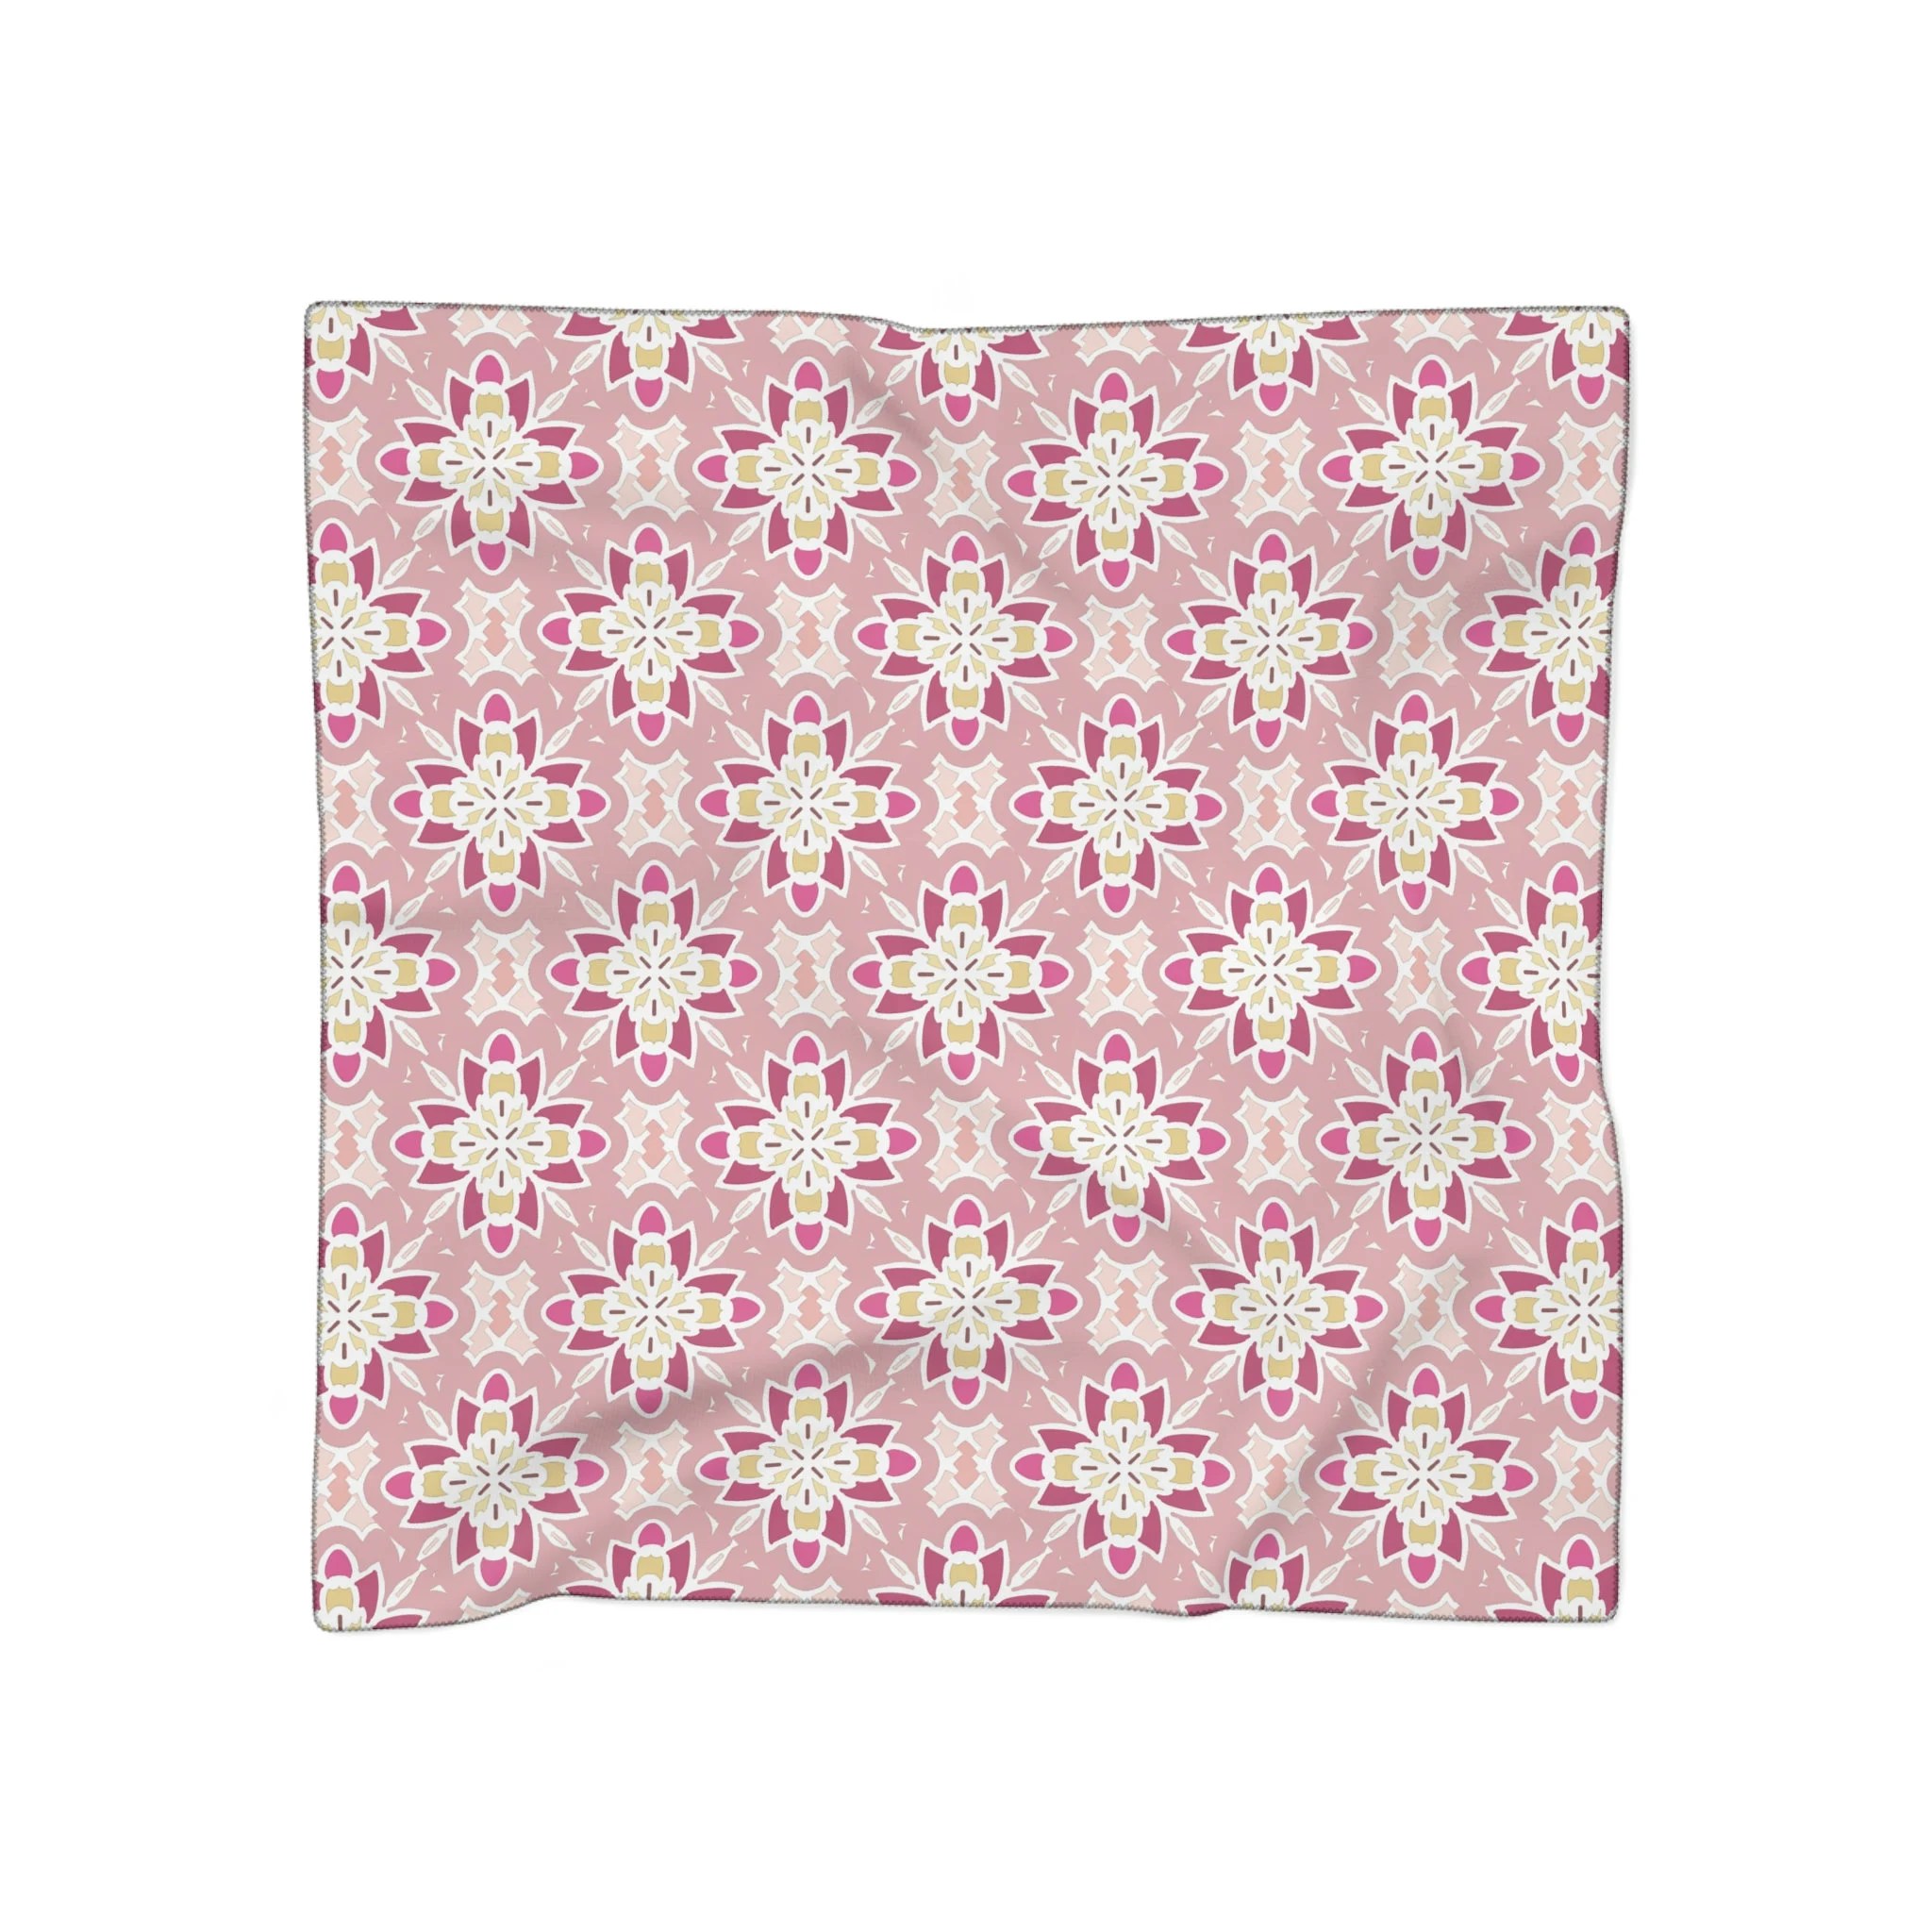 25 Inch Square Scarf Head Wrap or Tie | Silky Soft Poly Chiffon Material | Pink Pinwheels v2